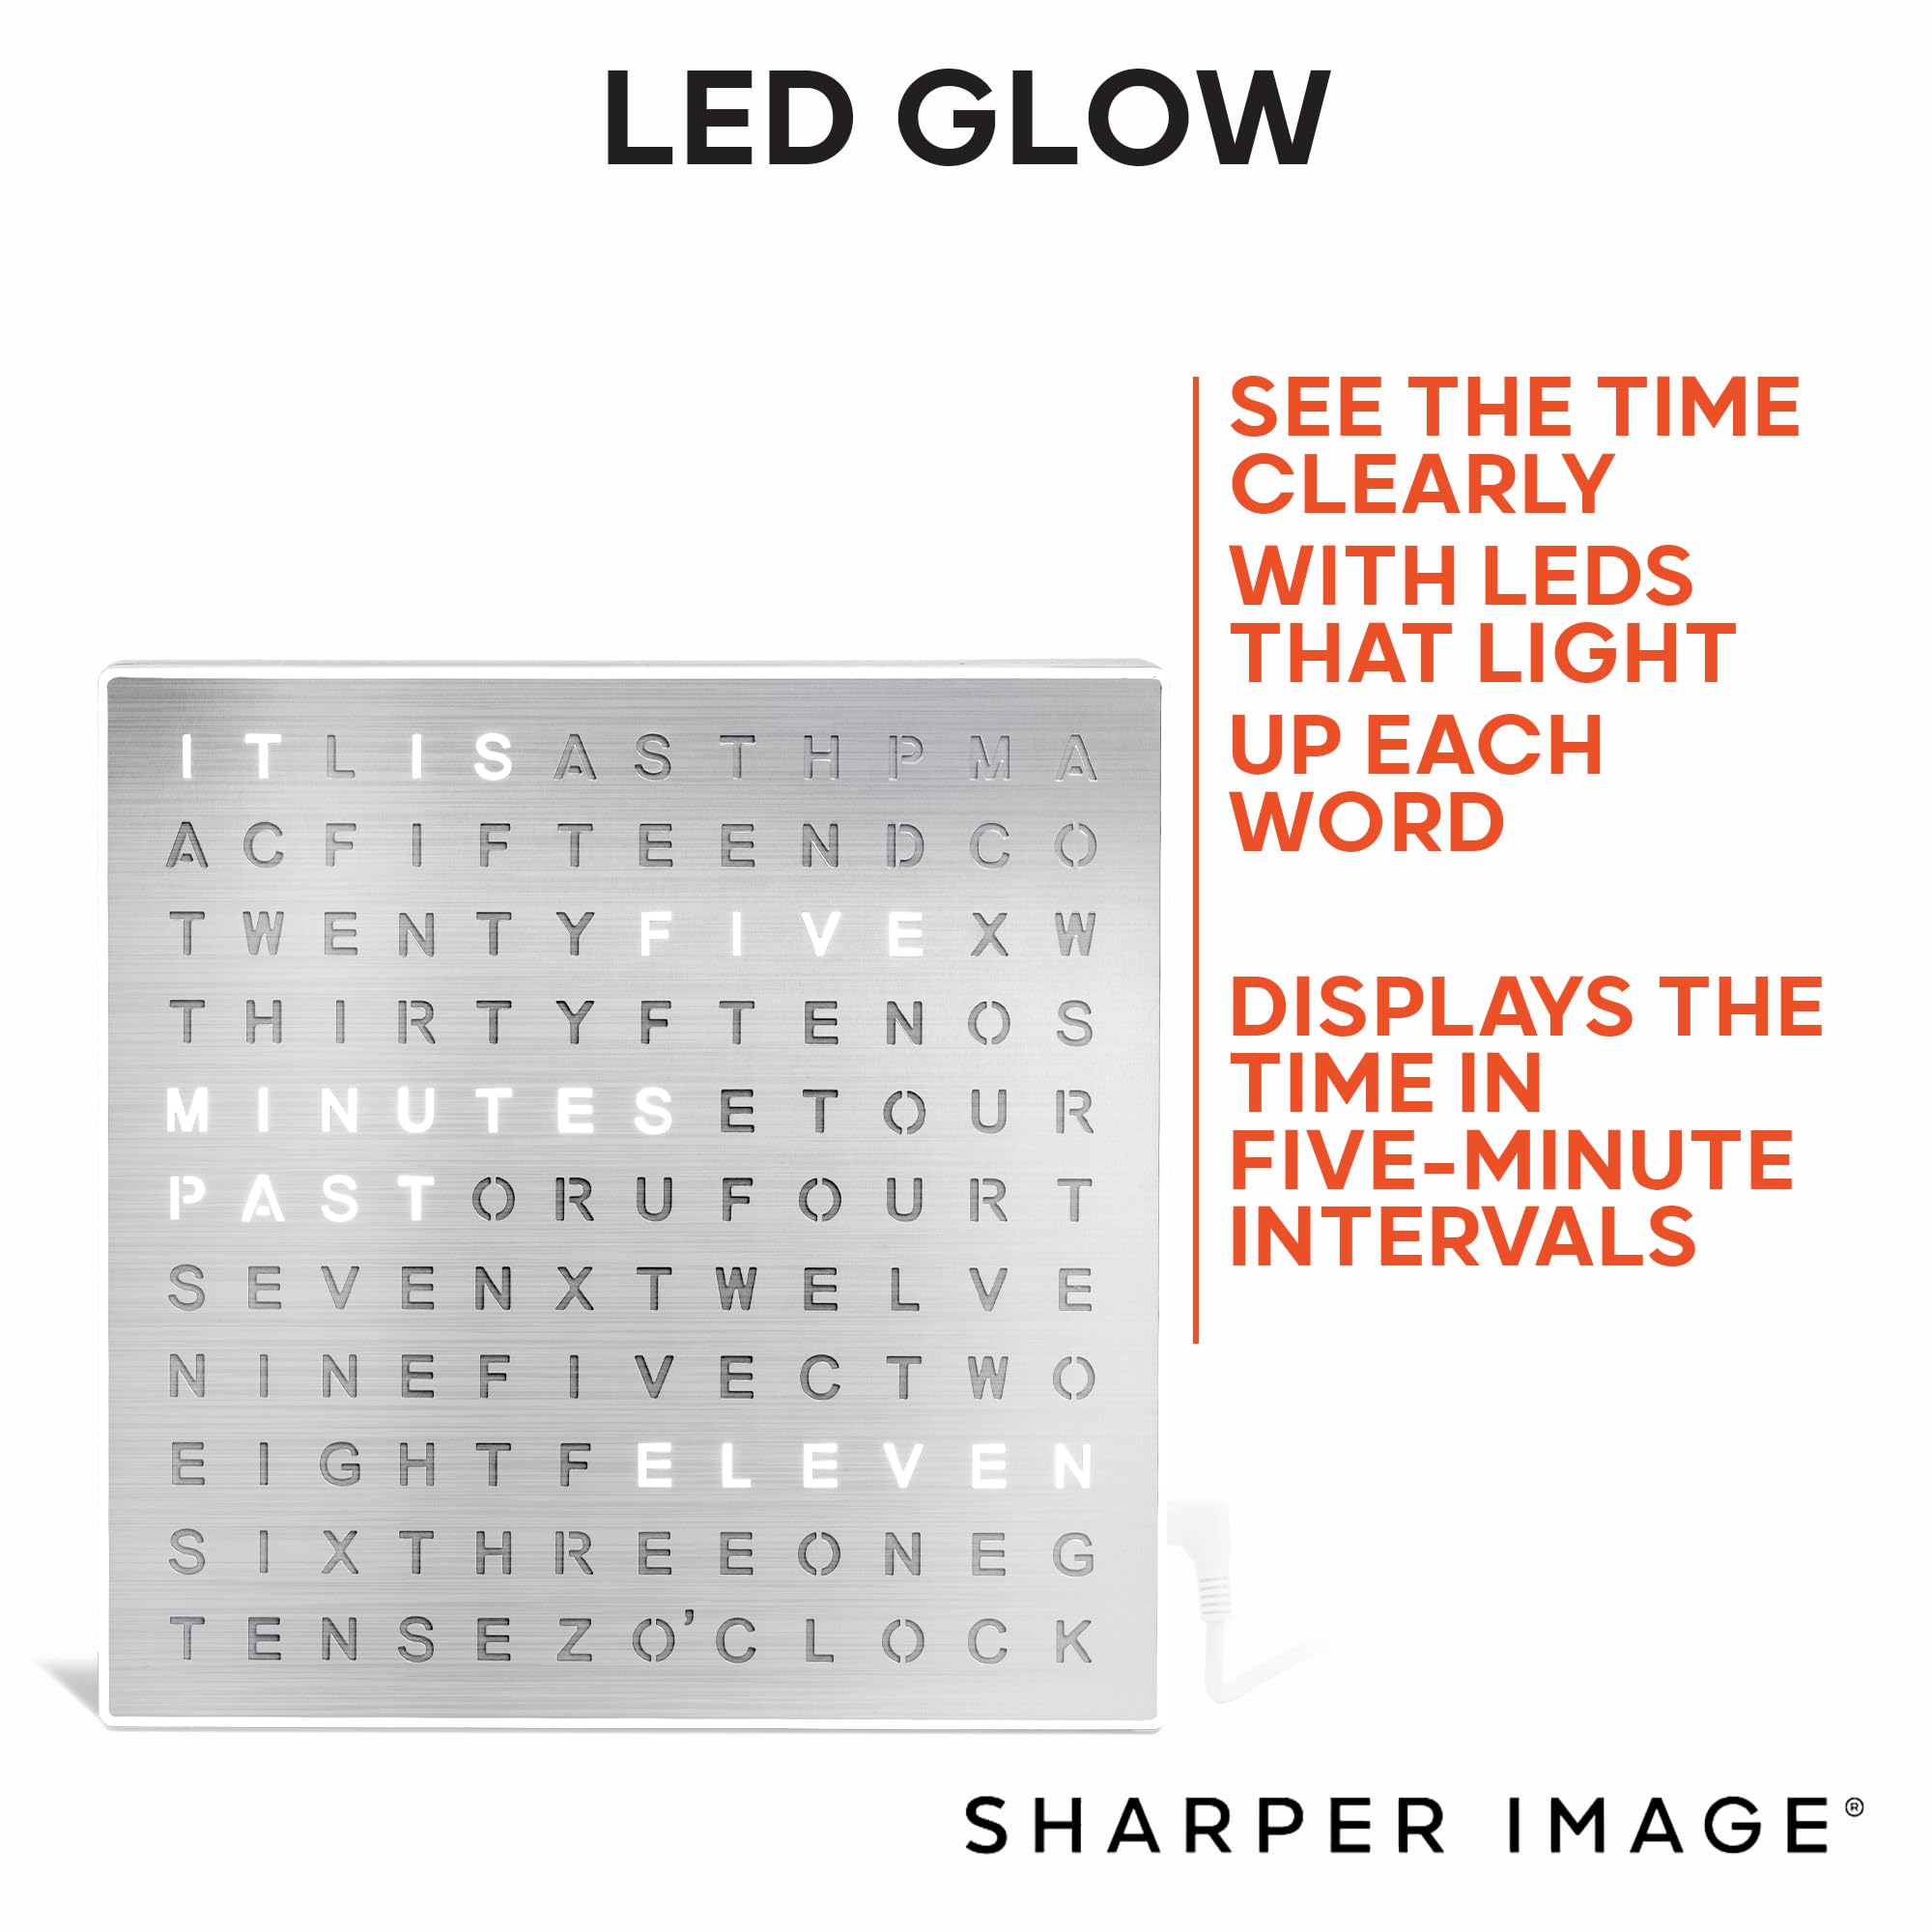 Sharper Image® LED Light-Up Word Clock [Amazon Exclusive] 7.75" Modern Design, Electronic Accent Wall & Desk Clock, USB Power Cord, Contemporary Home & Office Decor, Easy Setup, Housewarming Gift